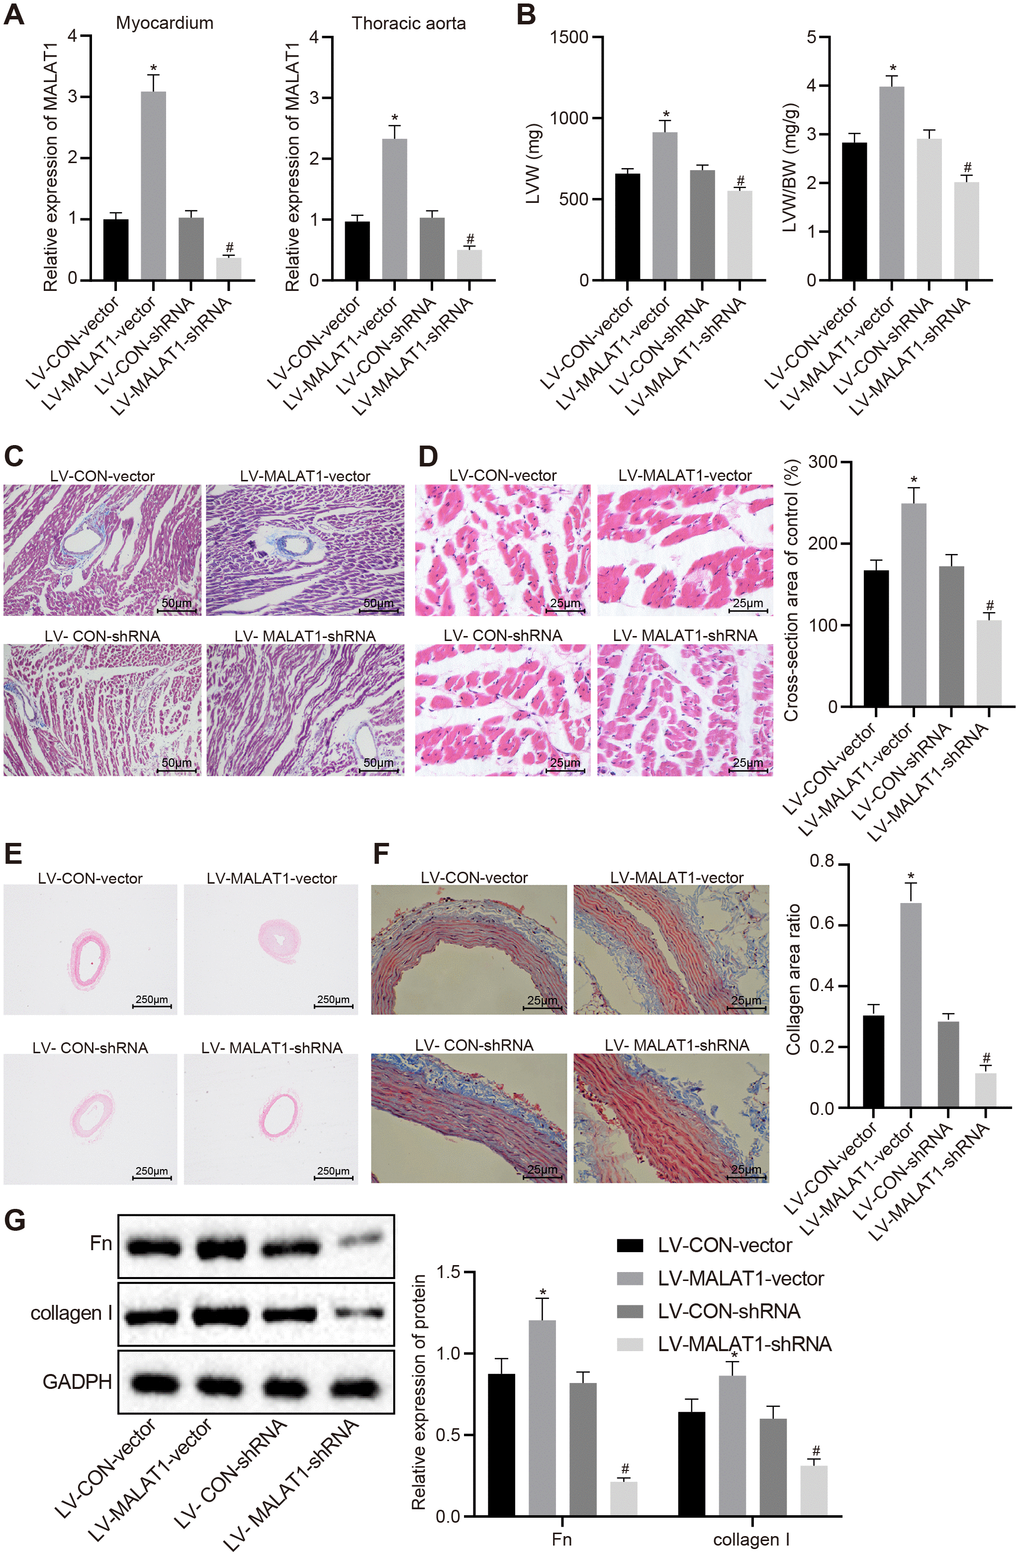 LncRNA MALAT1 over-expression promotes cardiac remodeling in hypertensive rats. (A) the expression of lncRNA MALAT1 in myocardial tissues and thoracic aortic vascular tissues of SHRs after over-expression or silencing of lncRNA MALAT1 detected by RT-qPCR; B, LVW and LVW/BW ratio in SHRs after over-expression or silencing of lncRNA MALAT1; (C) Masson staining images of myocardial tissues after over-expression or silencing of lncRNA MALAT1 (scale bar = 50 μm); (D) HE staining images of myocardial tissues after over-expression or silencing of lncRNA MALAT1 (scale bar = 25 μm); (E) pathological changes of thoracic aortic vascular tissues of SHRs observed using HE staining after over-expression or silencing of lncRNA MALAT1 (× 40); (F) collagen deposition in thoracic aortic vascular tissues of SHRs after over-expression or silencing of lncRNA MALAT1, observed by Masson staining (× 400); (G) the expression of fibronectin and collagen protein in thoracic aortic vascular tissues of SHRs after over-expression or silencing of lncRNA MALAT1, determined by Western blot analysis; *, p vs. the LV-CON-vector group; #, p vs. the LV-CON-shRNA group; measurement data were expressed by means ± standard deviation and analyzed by one-way analysis of variance; n = 6.